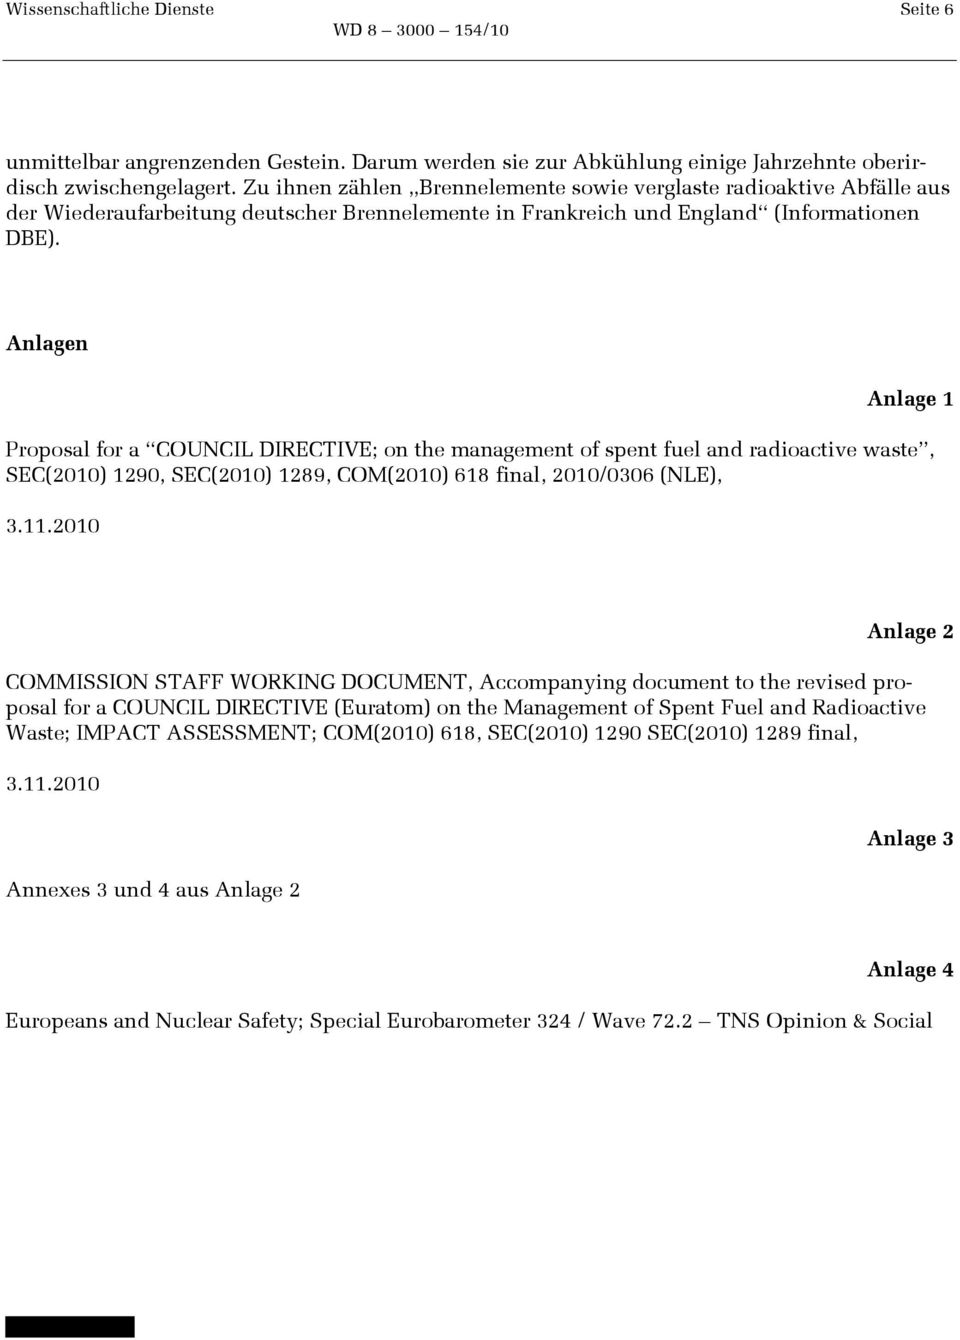 Anlagen Anlage 1 Proposal for a COUNCIL DIRECTIVE; on the management of spent fuel and radioactive waste, SEC(2010) 1290, SEC(2010) 1289, COM(2010) 618 final, 2010/0306 (NLE), 3.11.